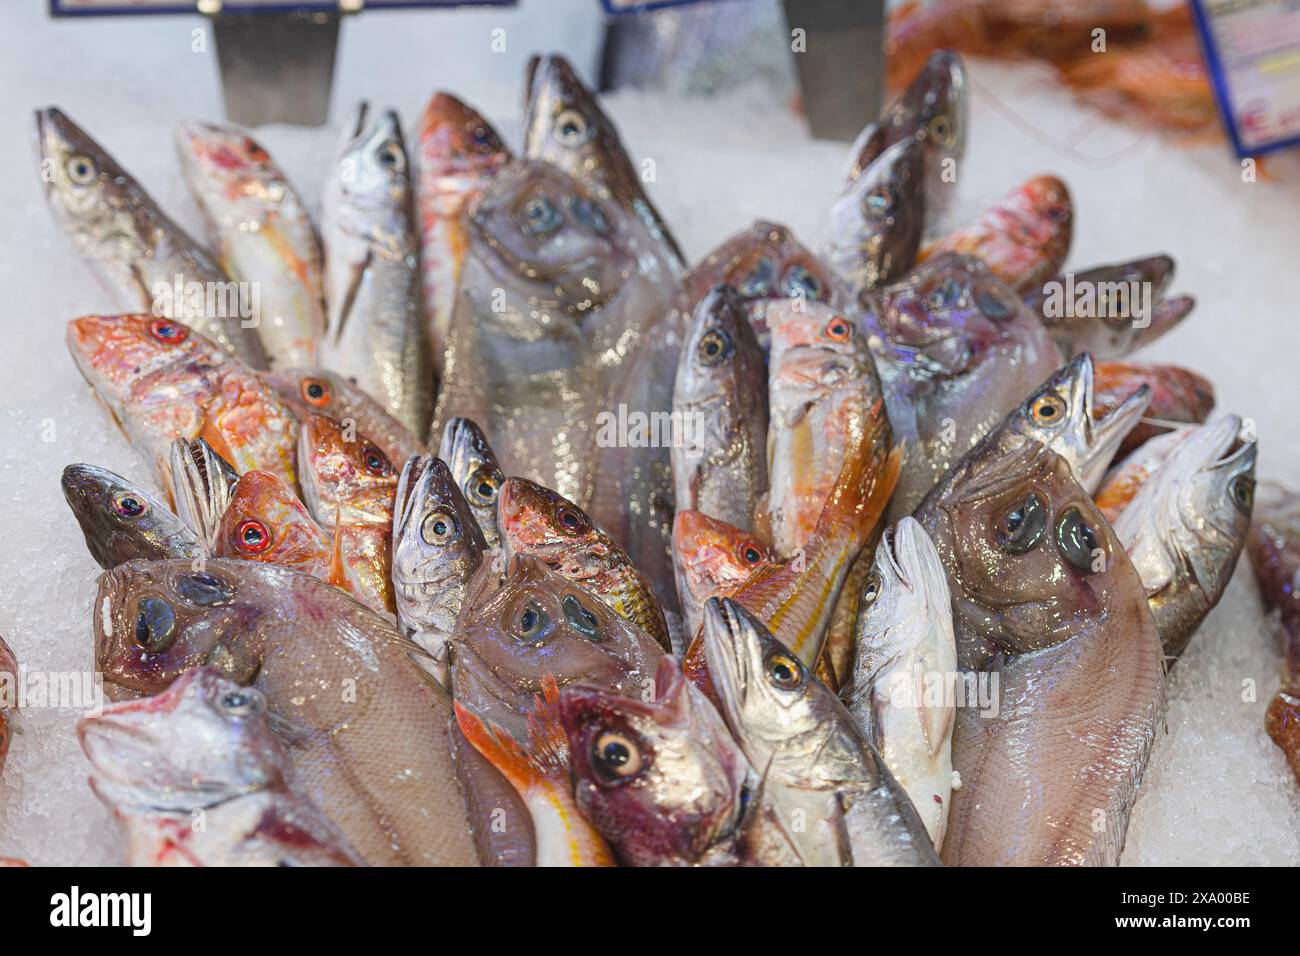 Various fresh fish displayed on the ice on the table for sale in a fish shop or market. Goatfish or red mullet, cod fish and sole Stock Photo